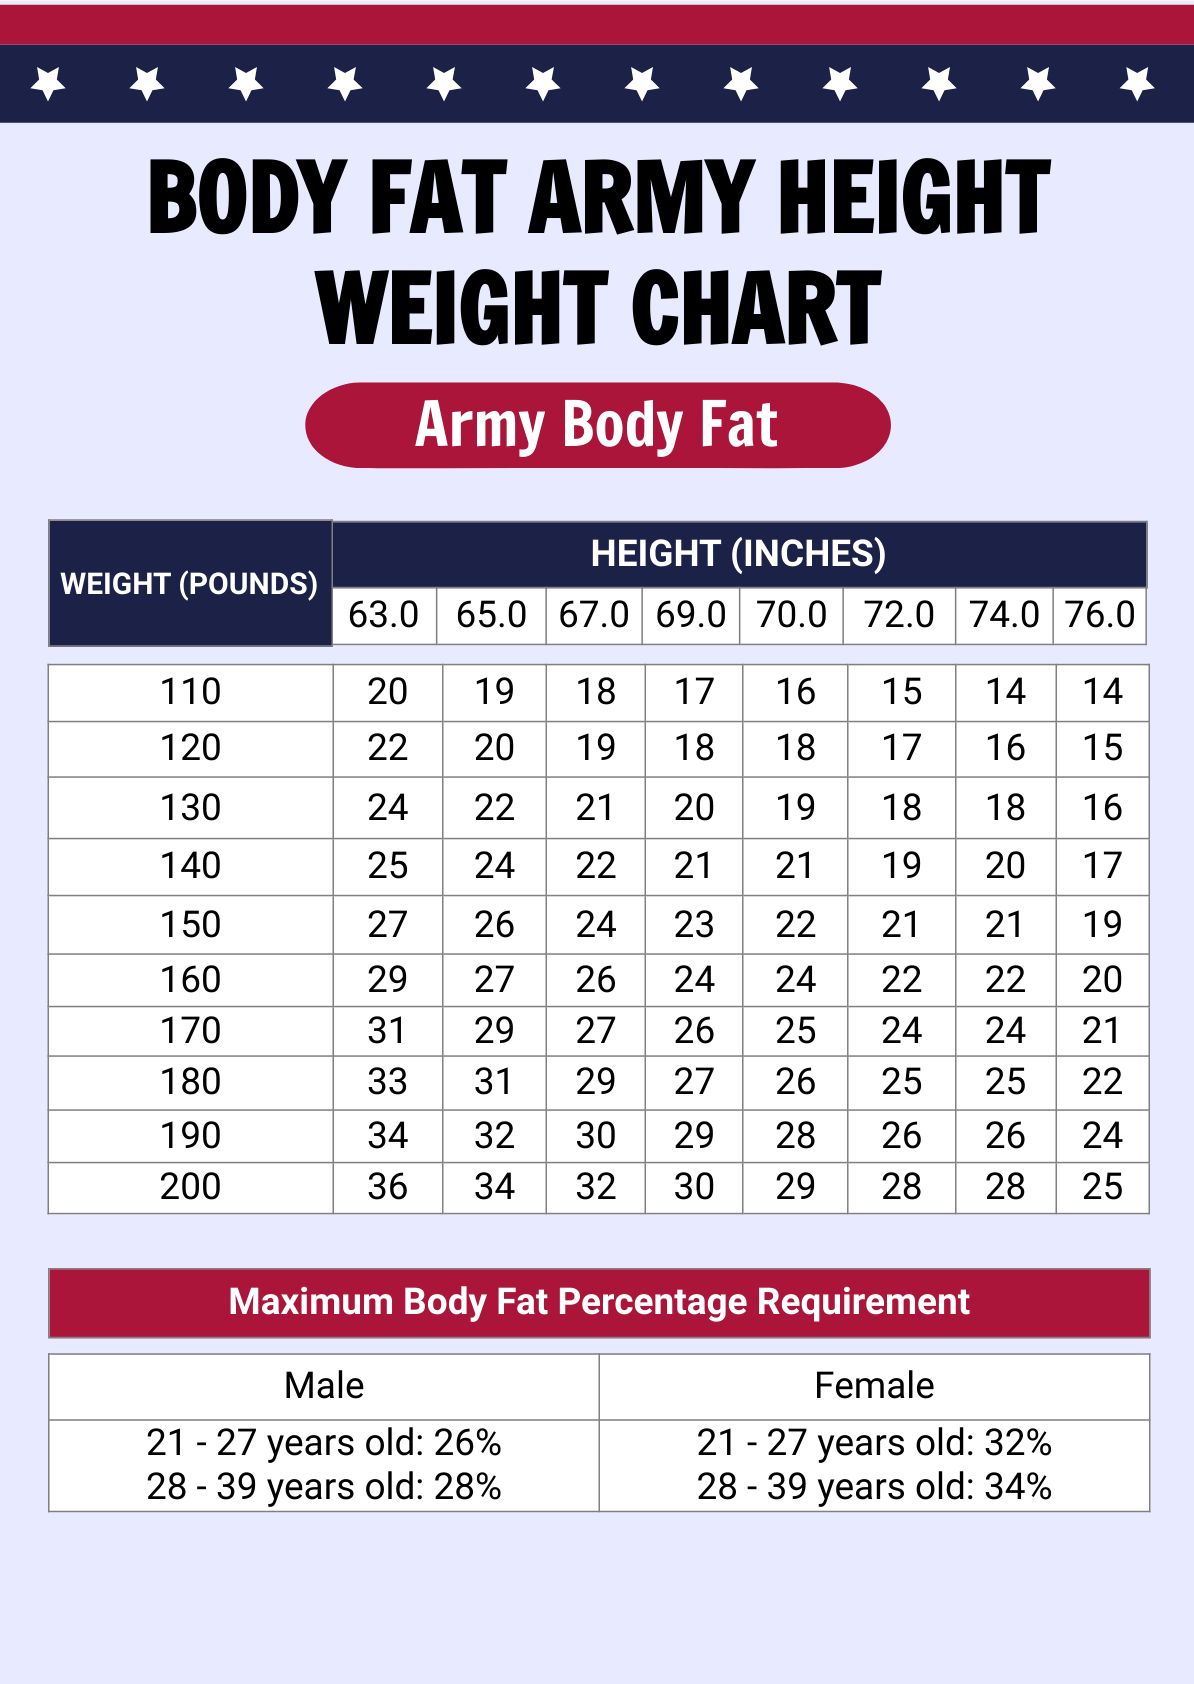 Body Fat Army Height Weight Chart